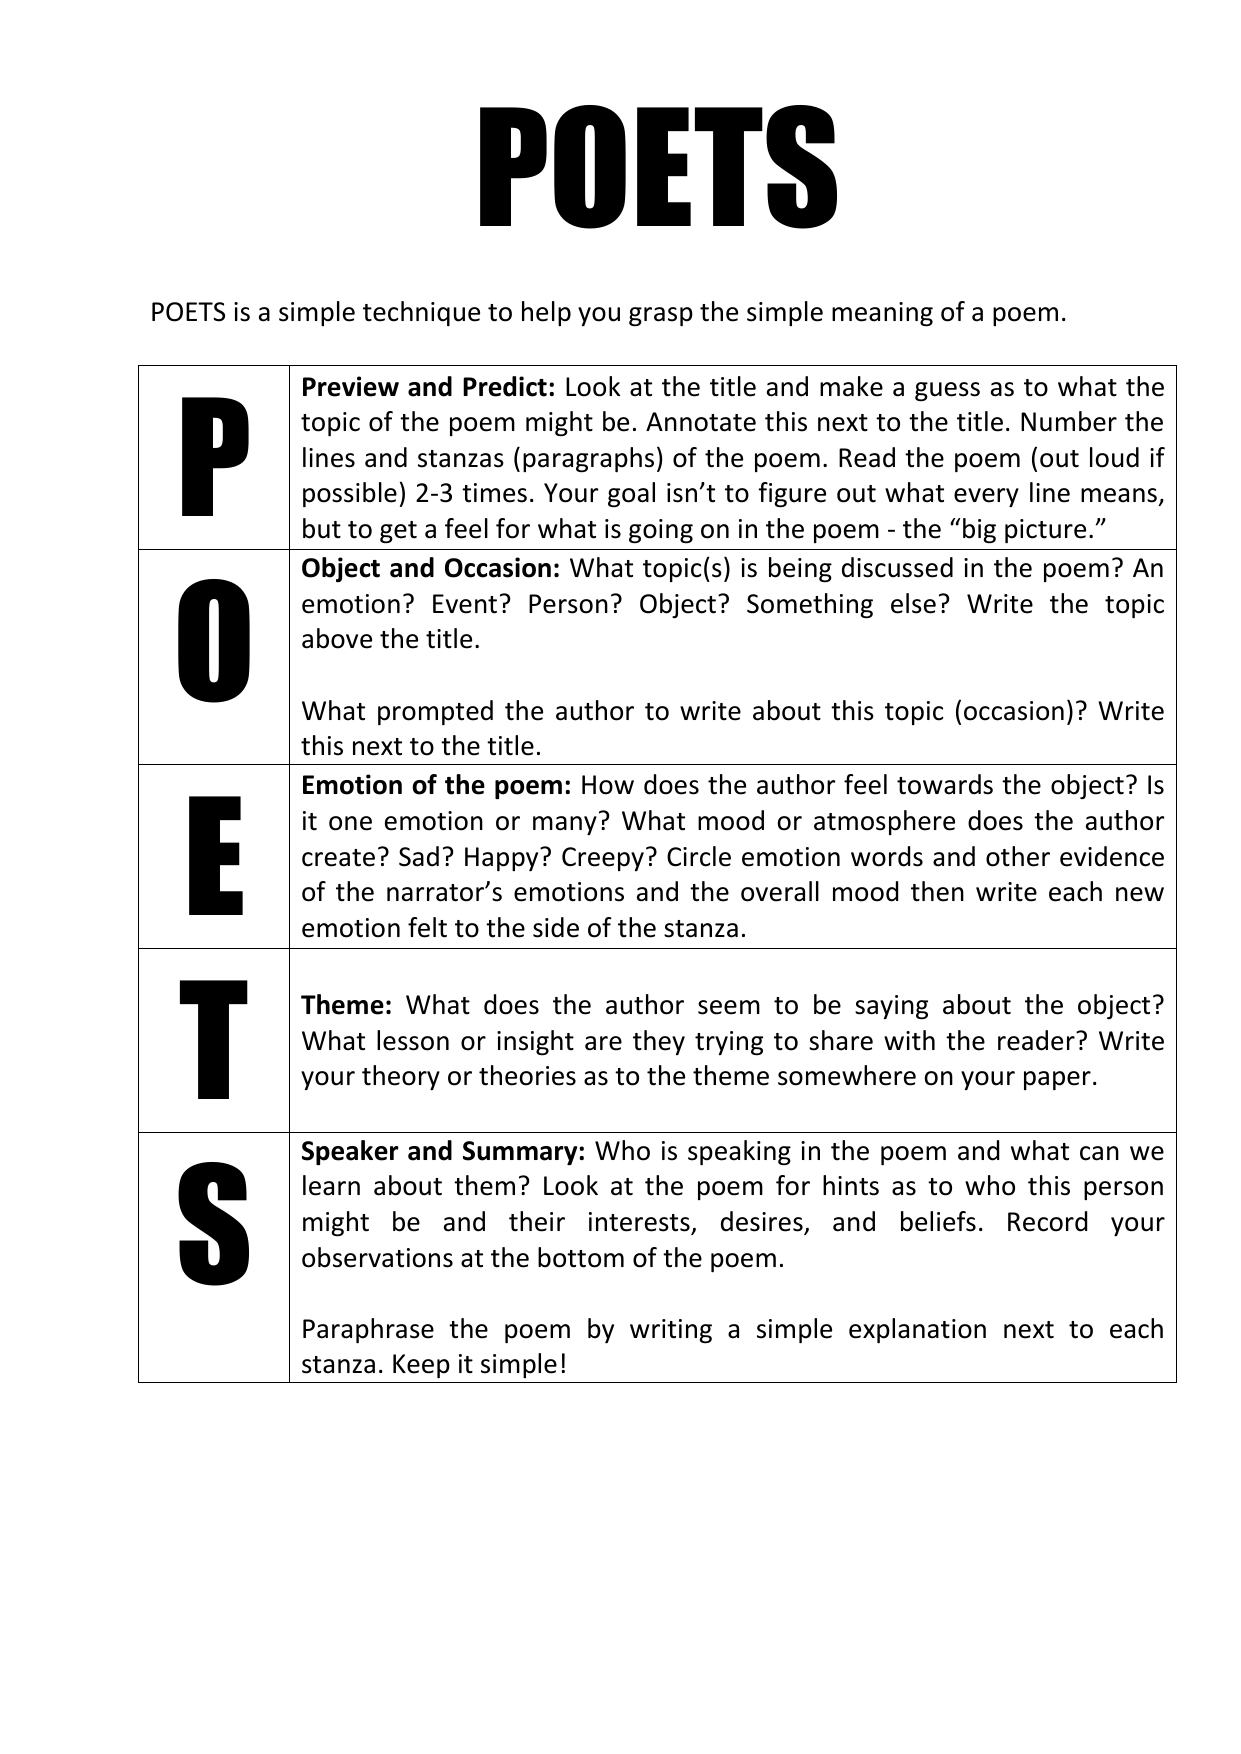 how to paraphrase a poem line by line